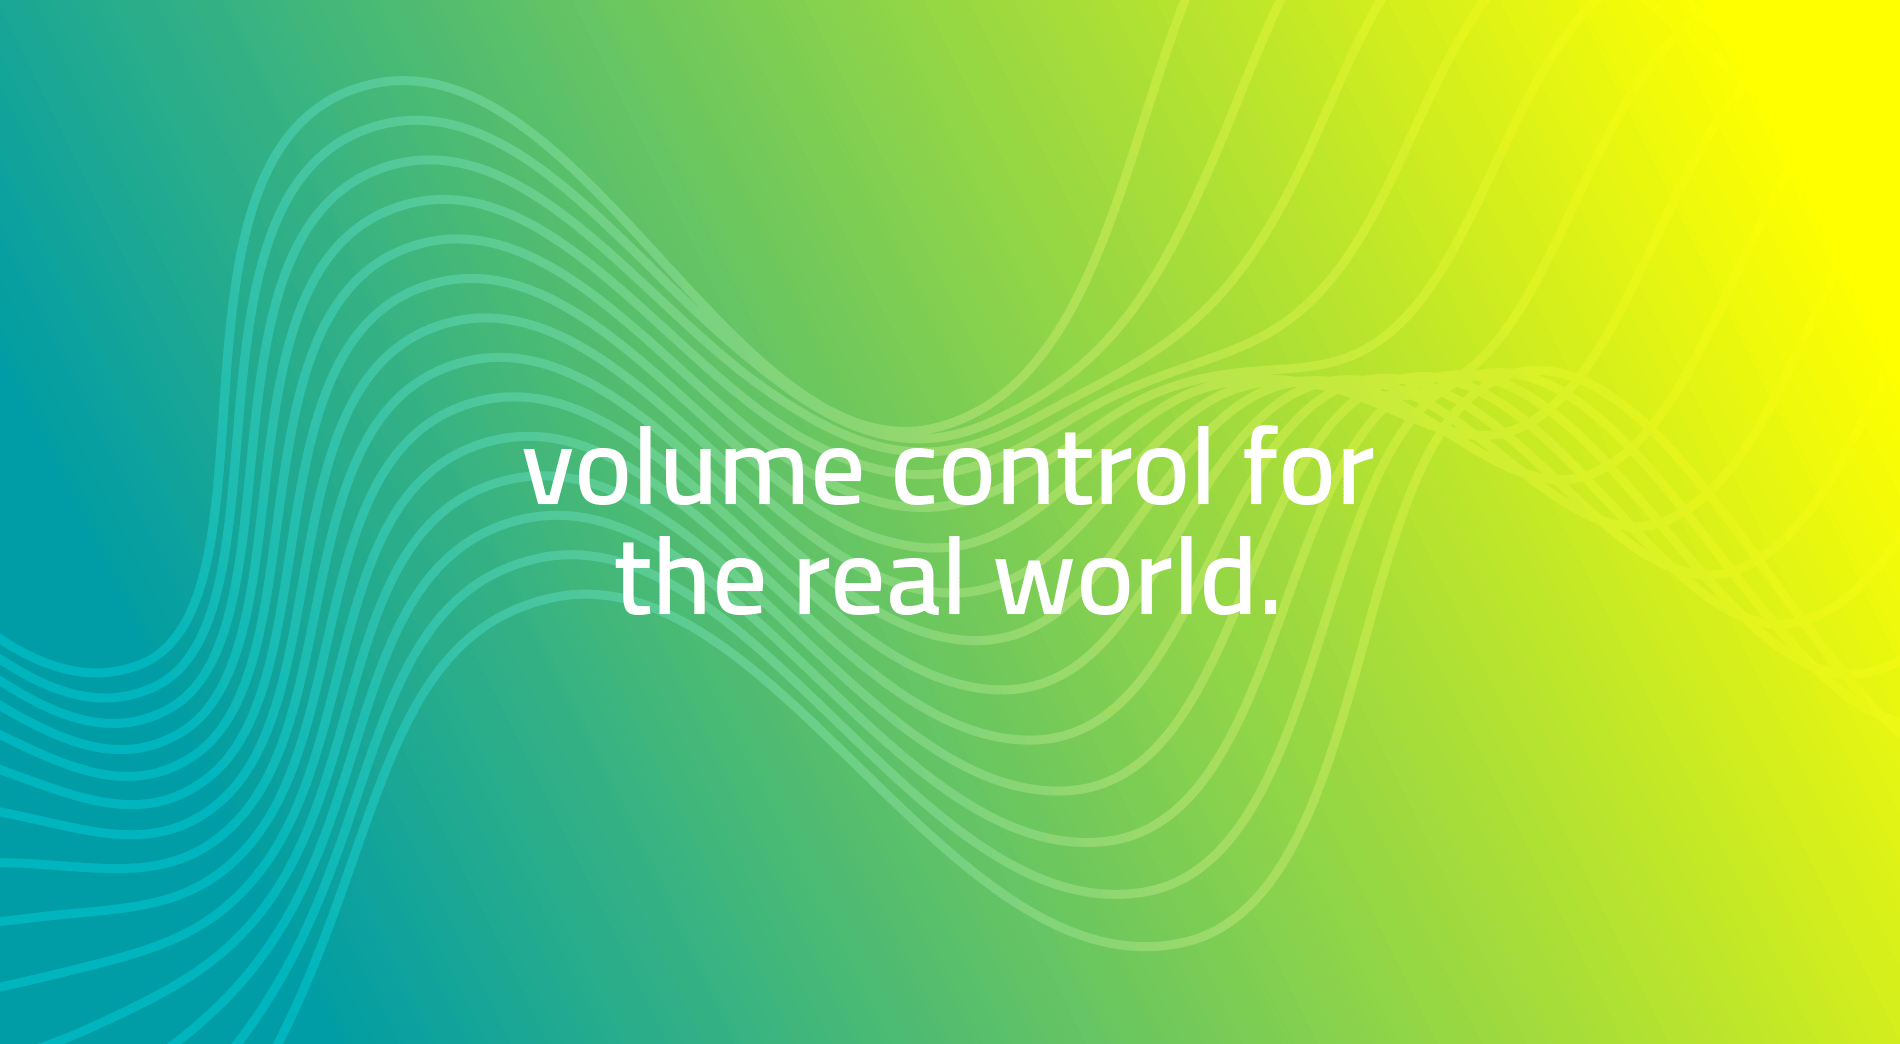 volume control for the real world.